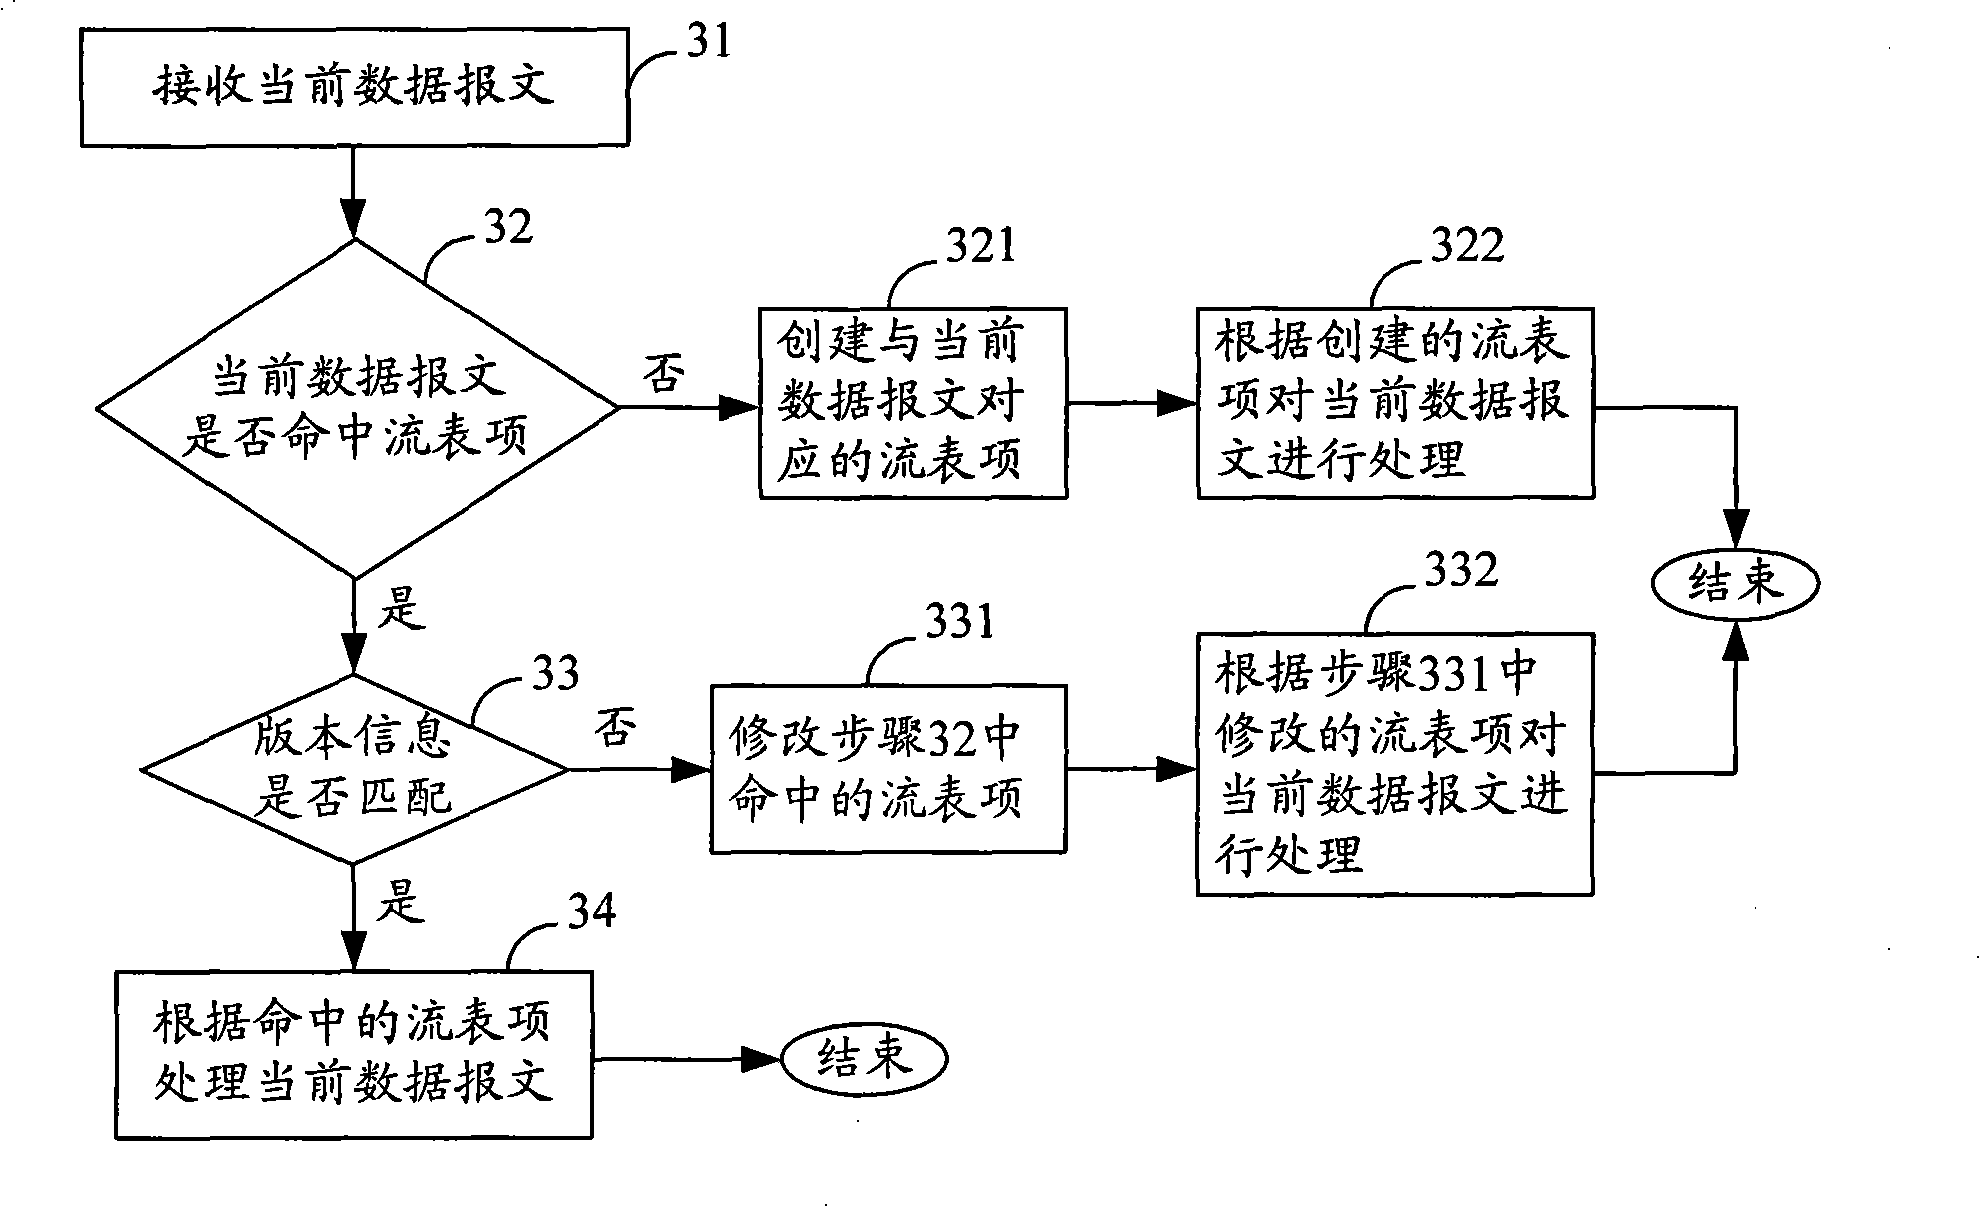 Method, apparatus and system for processing data